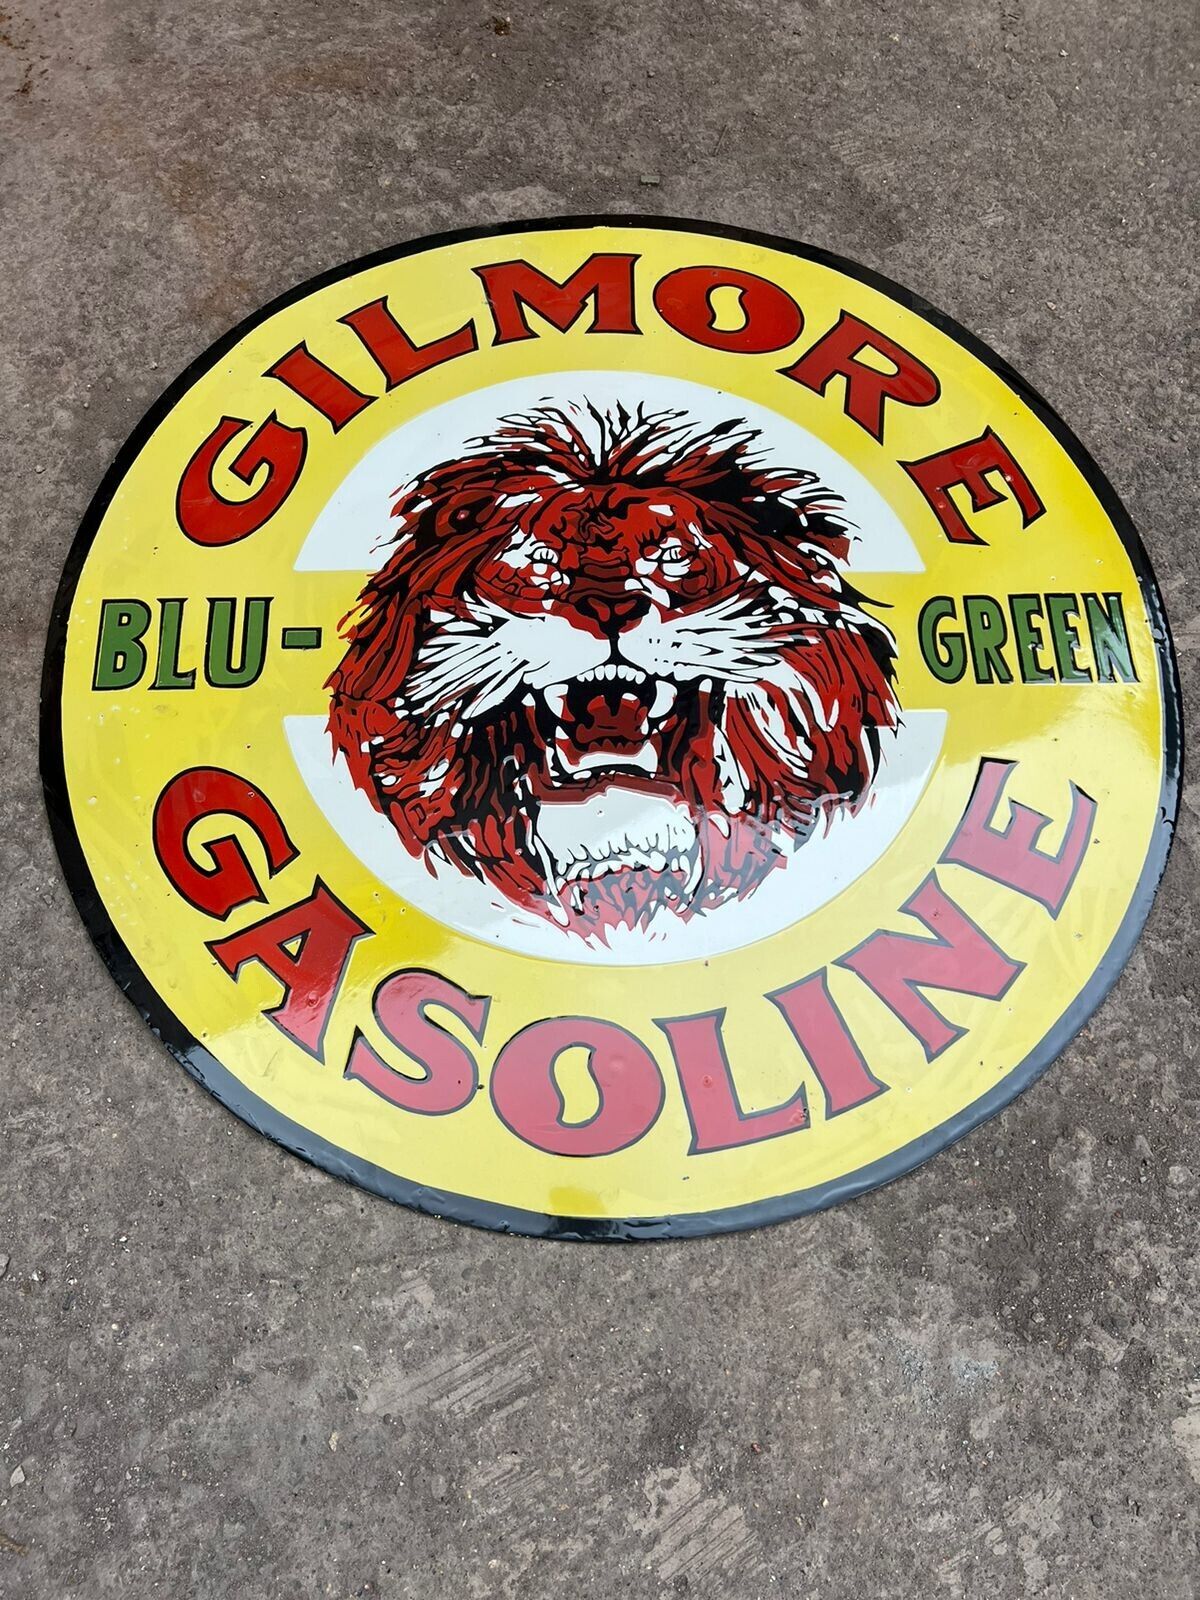 RARE PORCELAIN GILMORE GASOLINE ENAMEL SIGN 45X45 INCHES DOUBLE SIDED